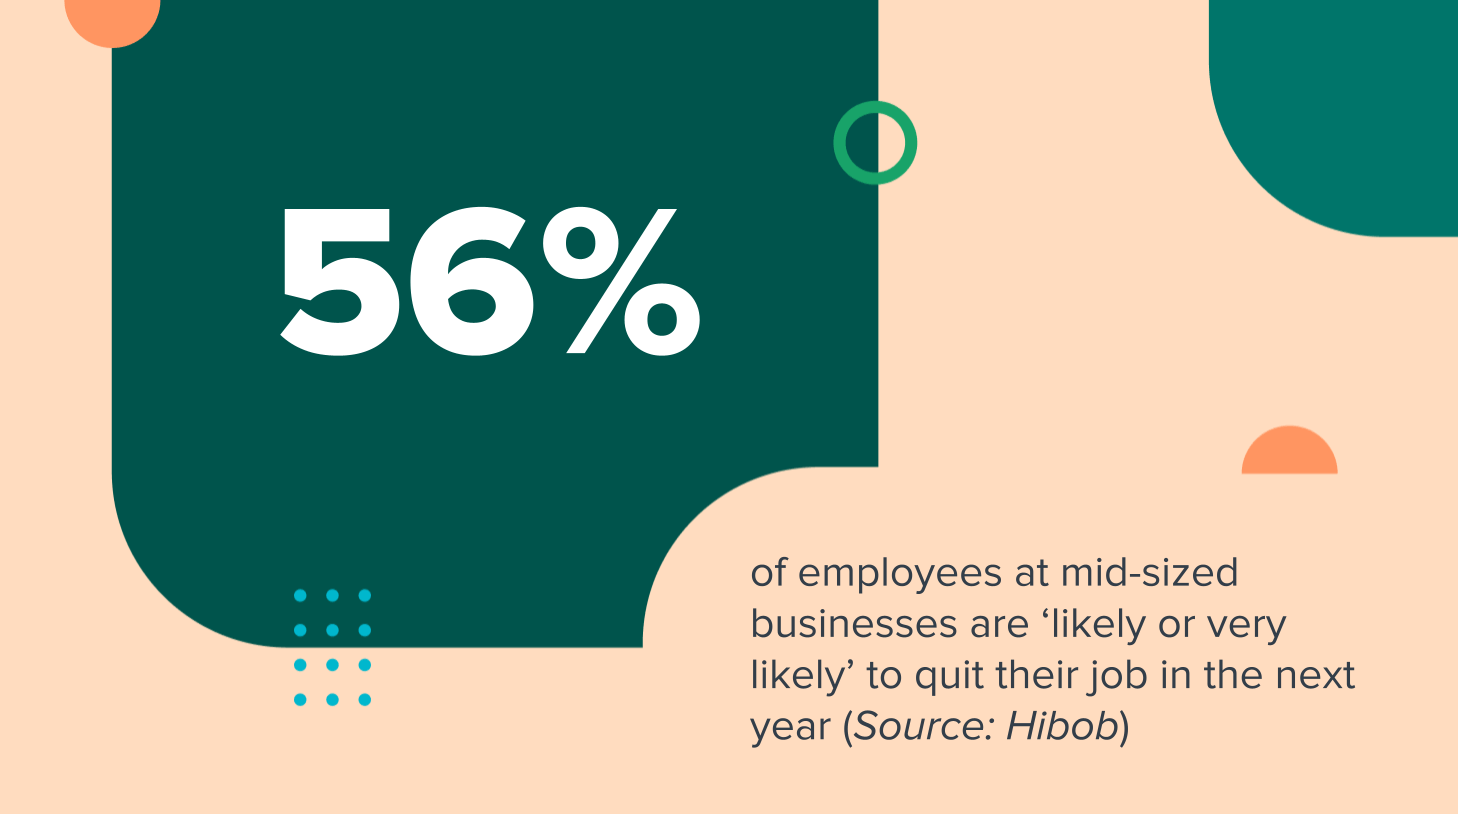 56% of mid-sized business employees plan to quit in the next year according to a new Hibob survey.